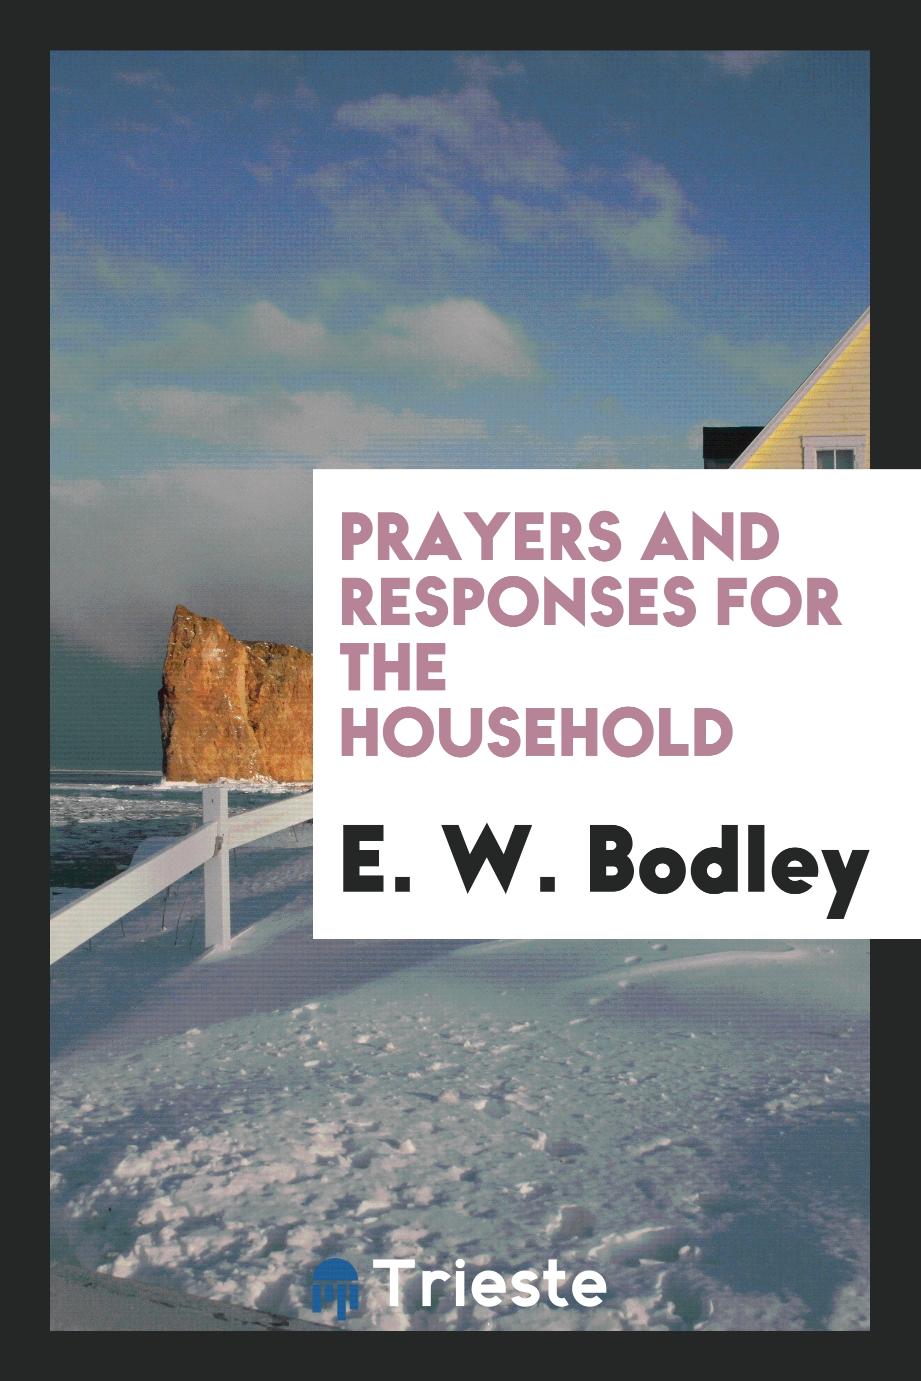 Prayers and responses for the household